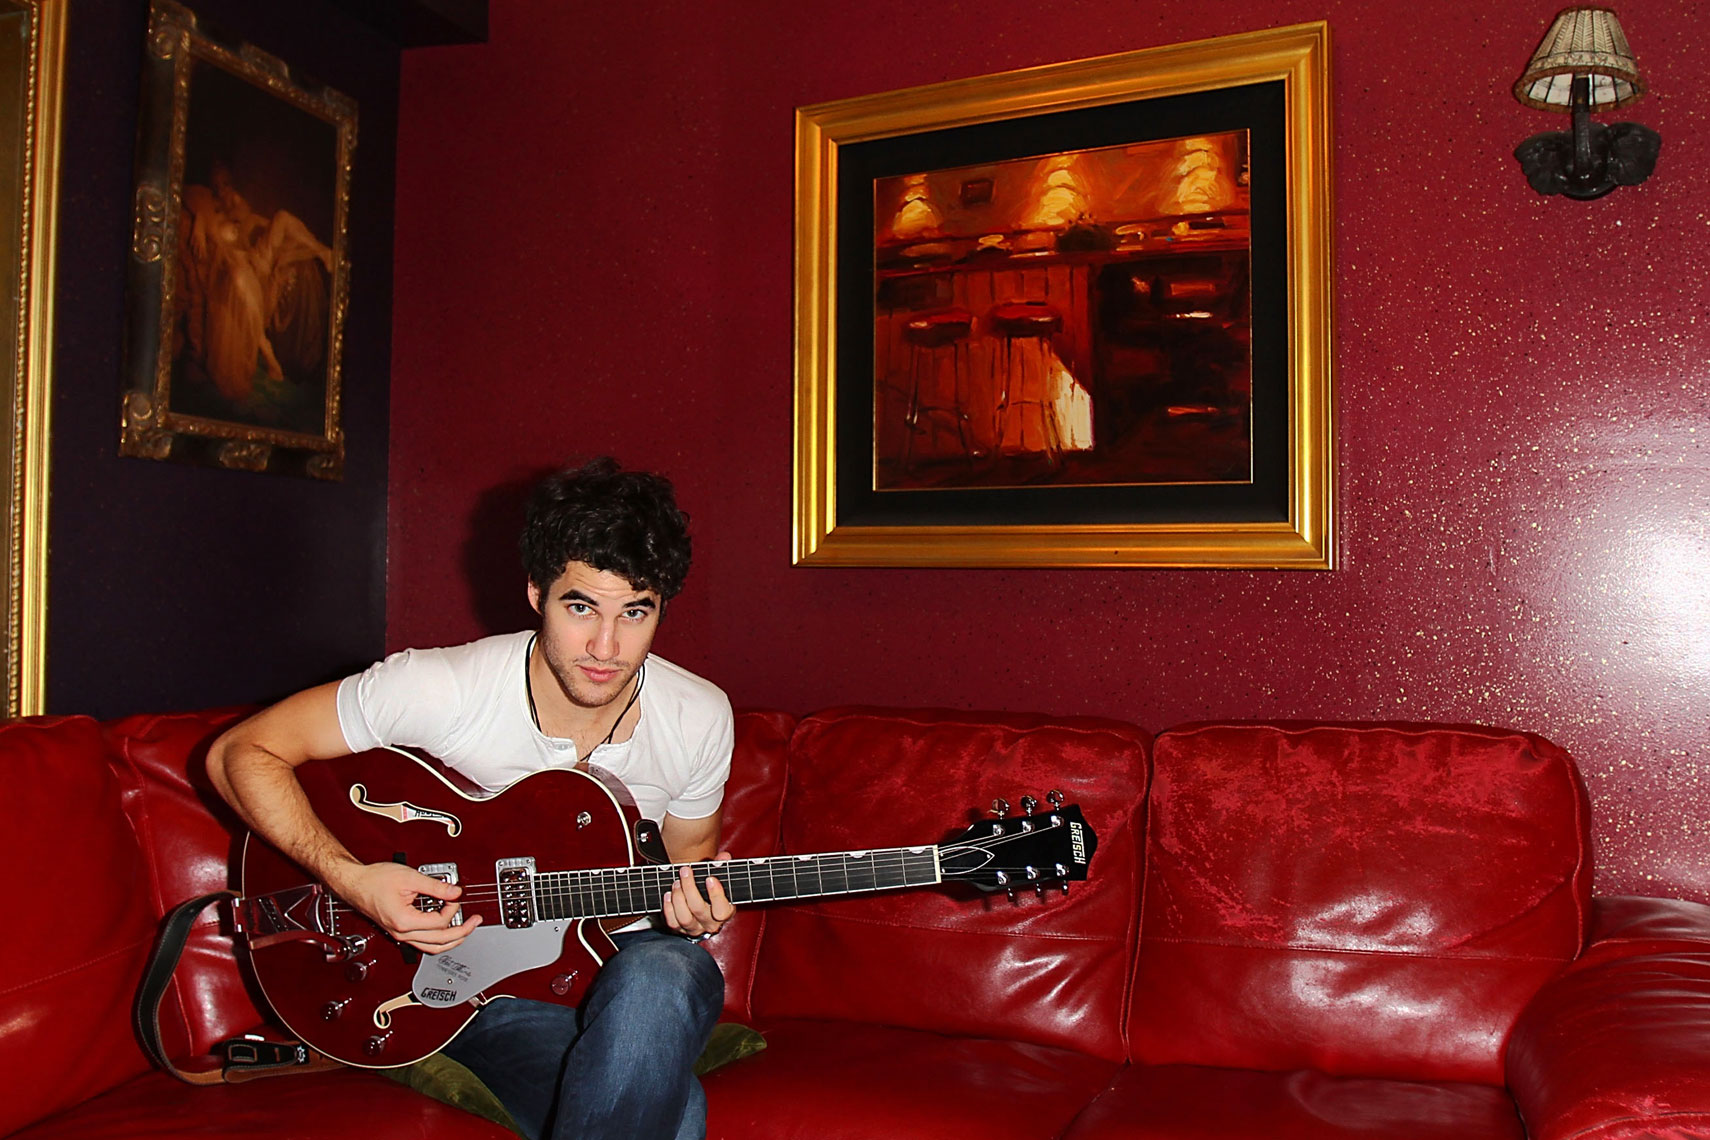 southern_california_commercial_portrait_photographer_126_darrencriss